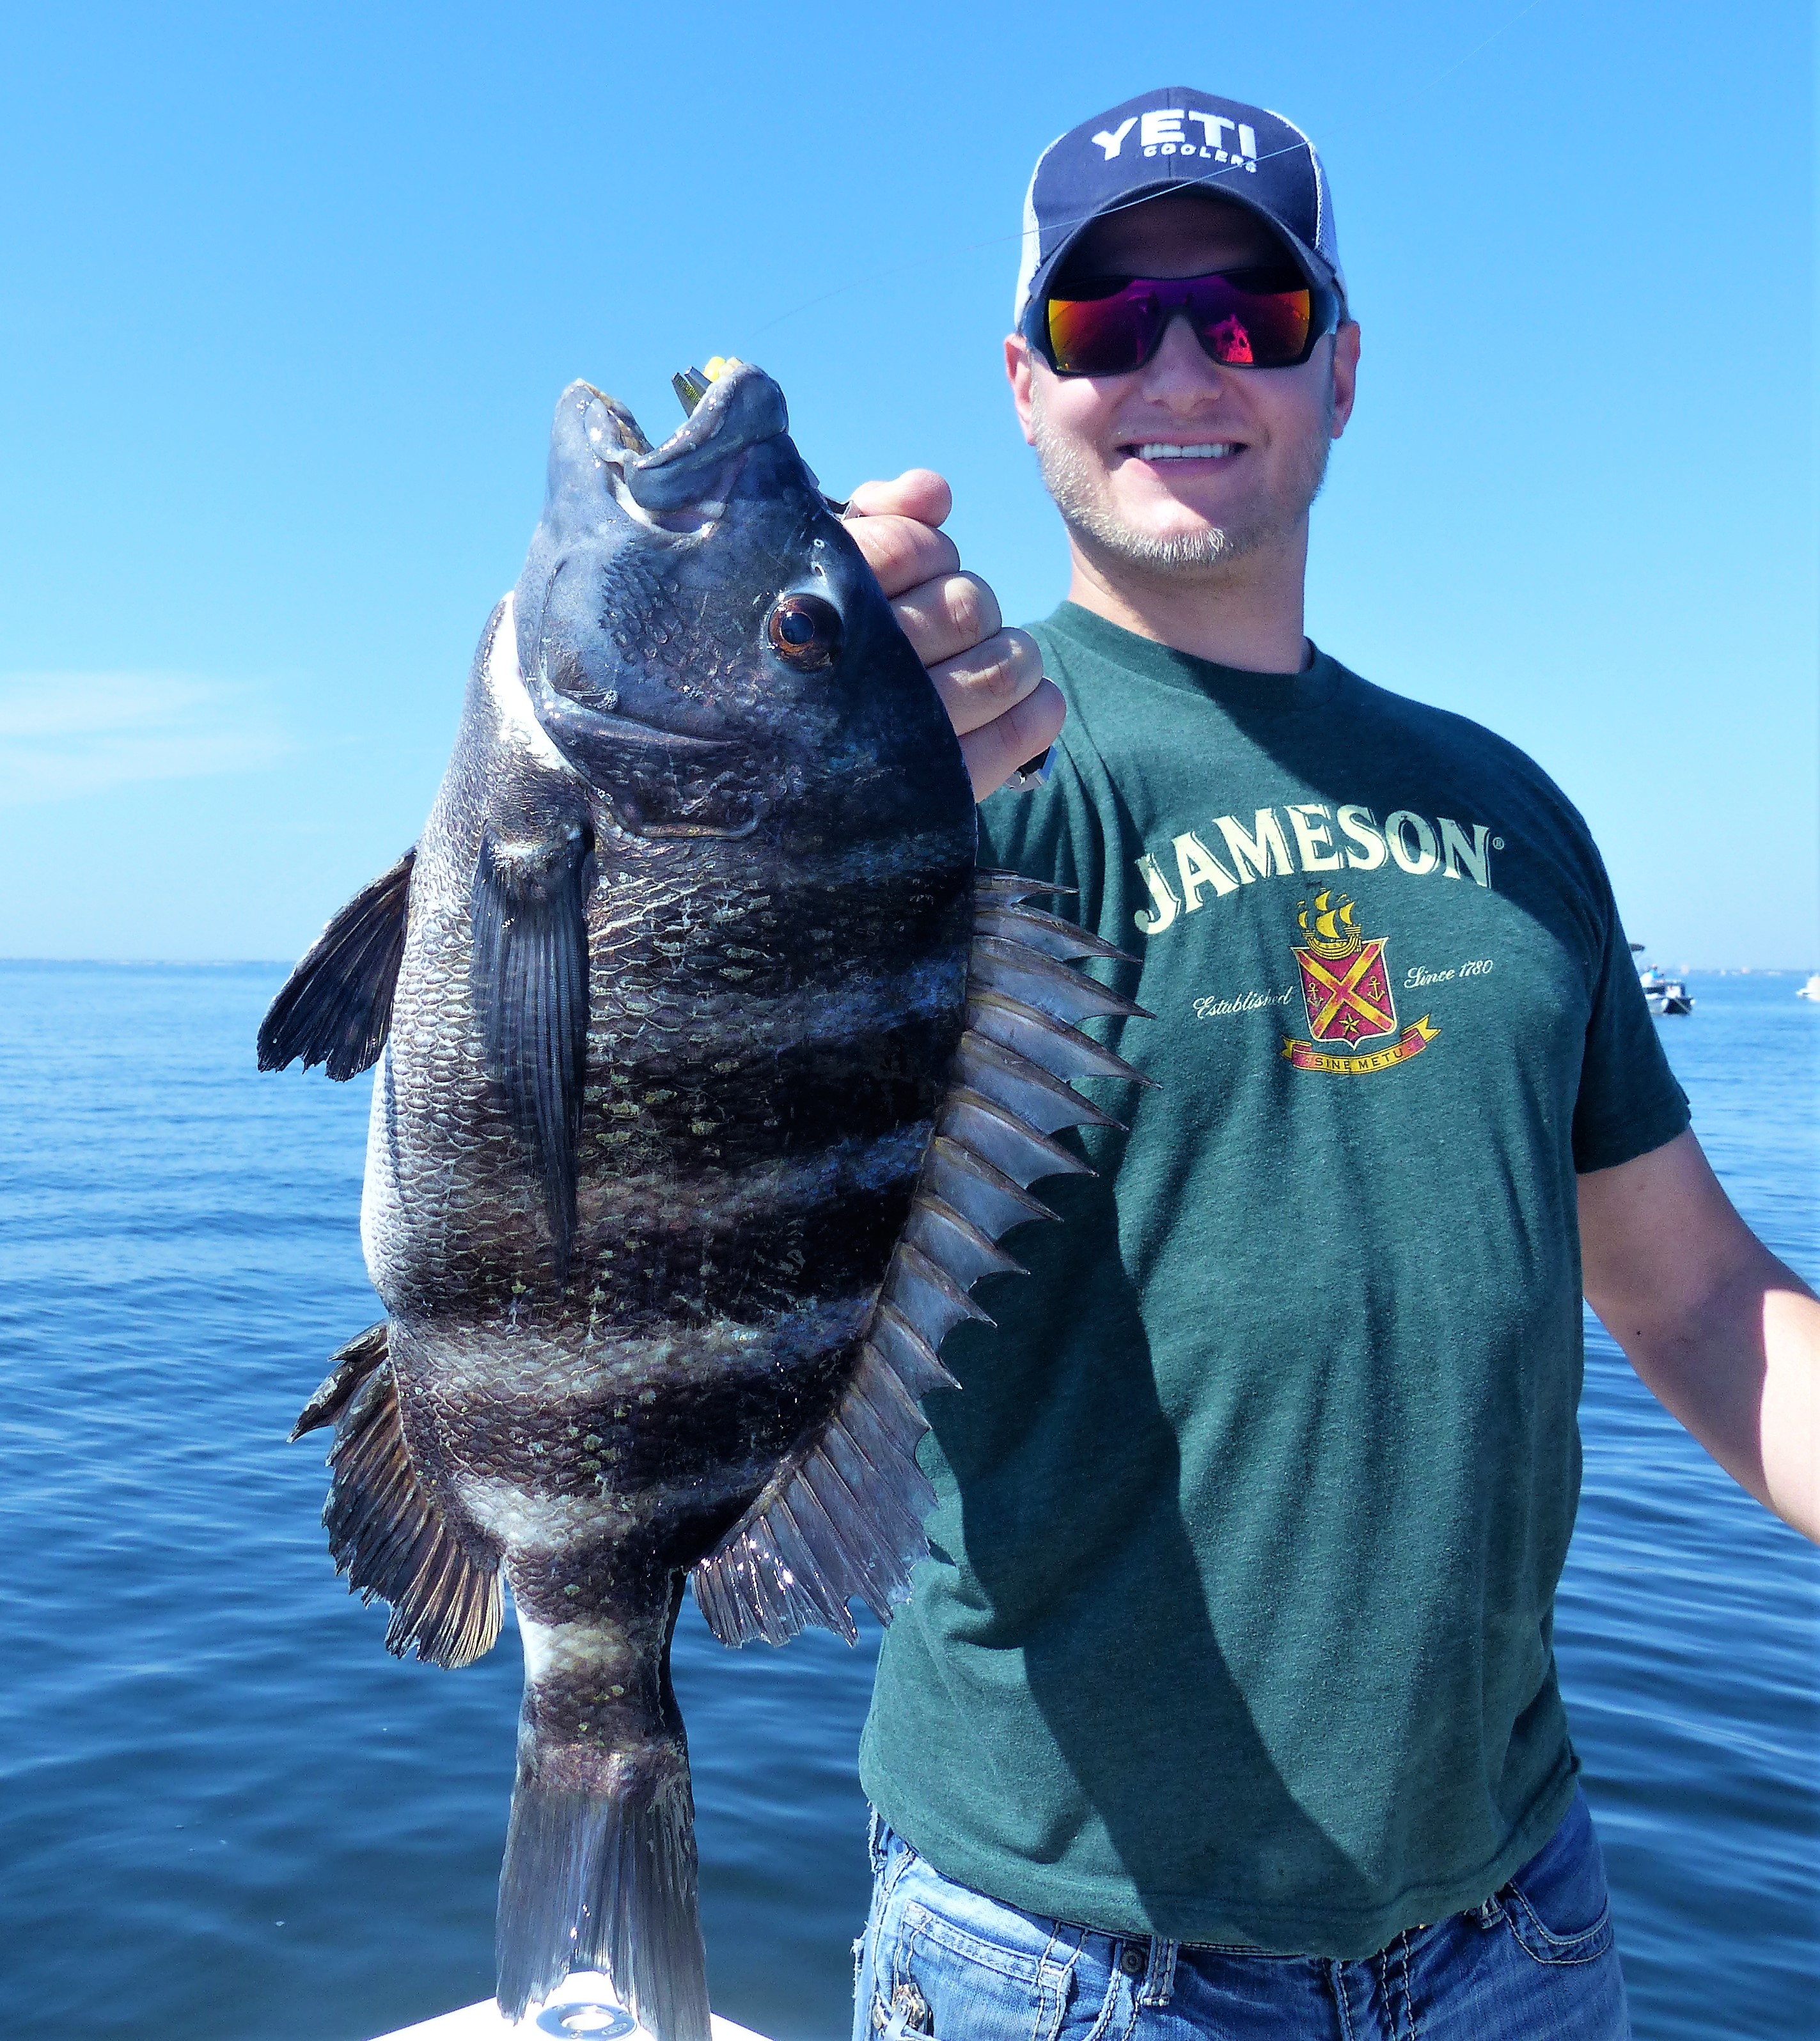 The “Fish Coach” shares HOW-to-CATCH Saltwater Sheepshead – a Winter Fishing Delicacy